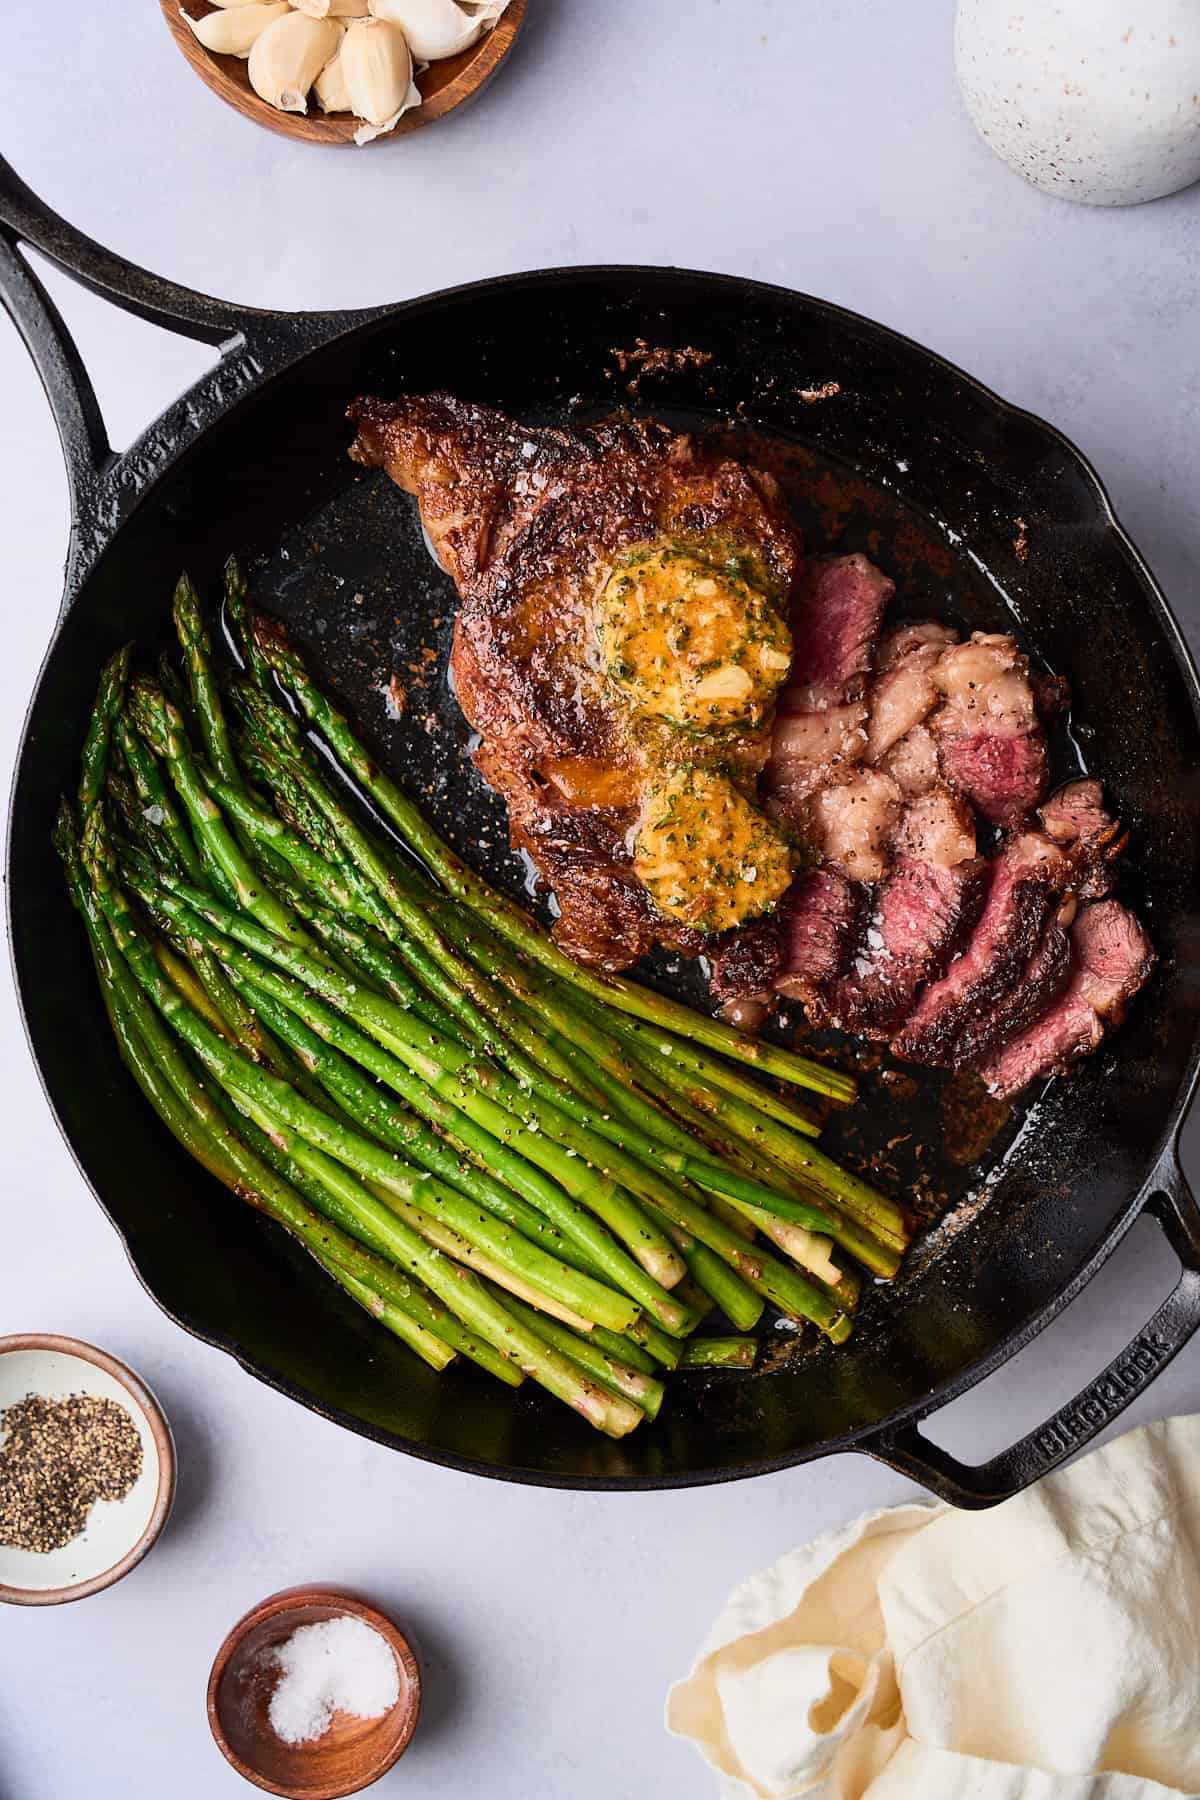 Ribeye steak and asparagus cooked in a cast iron skillet, topped with melting compound butter, and cut into to reveal the center cooked a perfect medium rare.